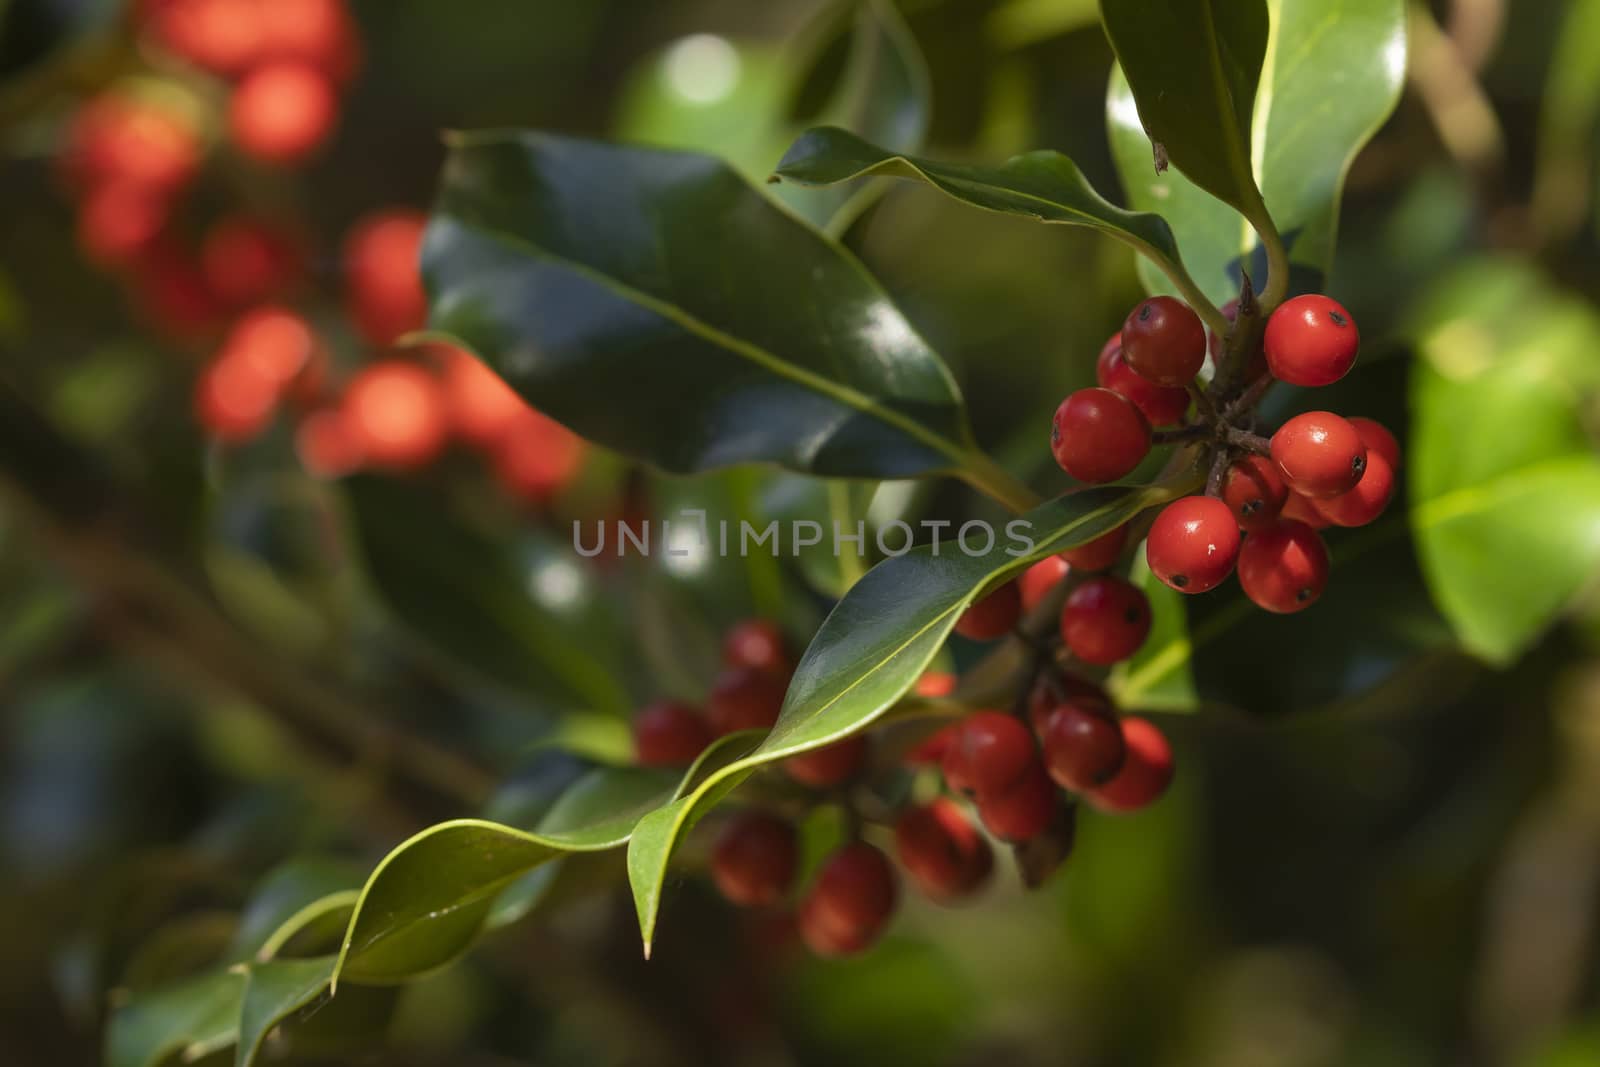 Wild holly in its natural environment, in the forest, with its red berries hidden among the leaves, near the small town of Luesia, in the upper area of the Cinco Villas region, Spain.